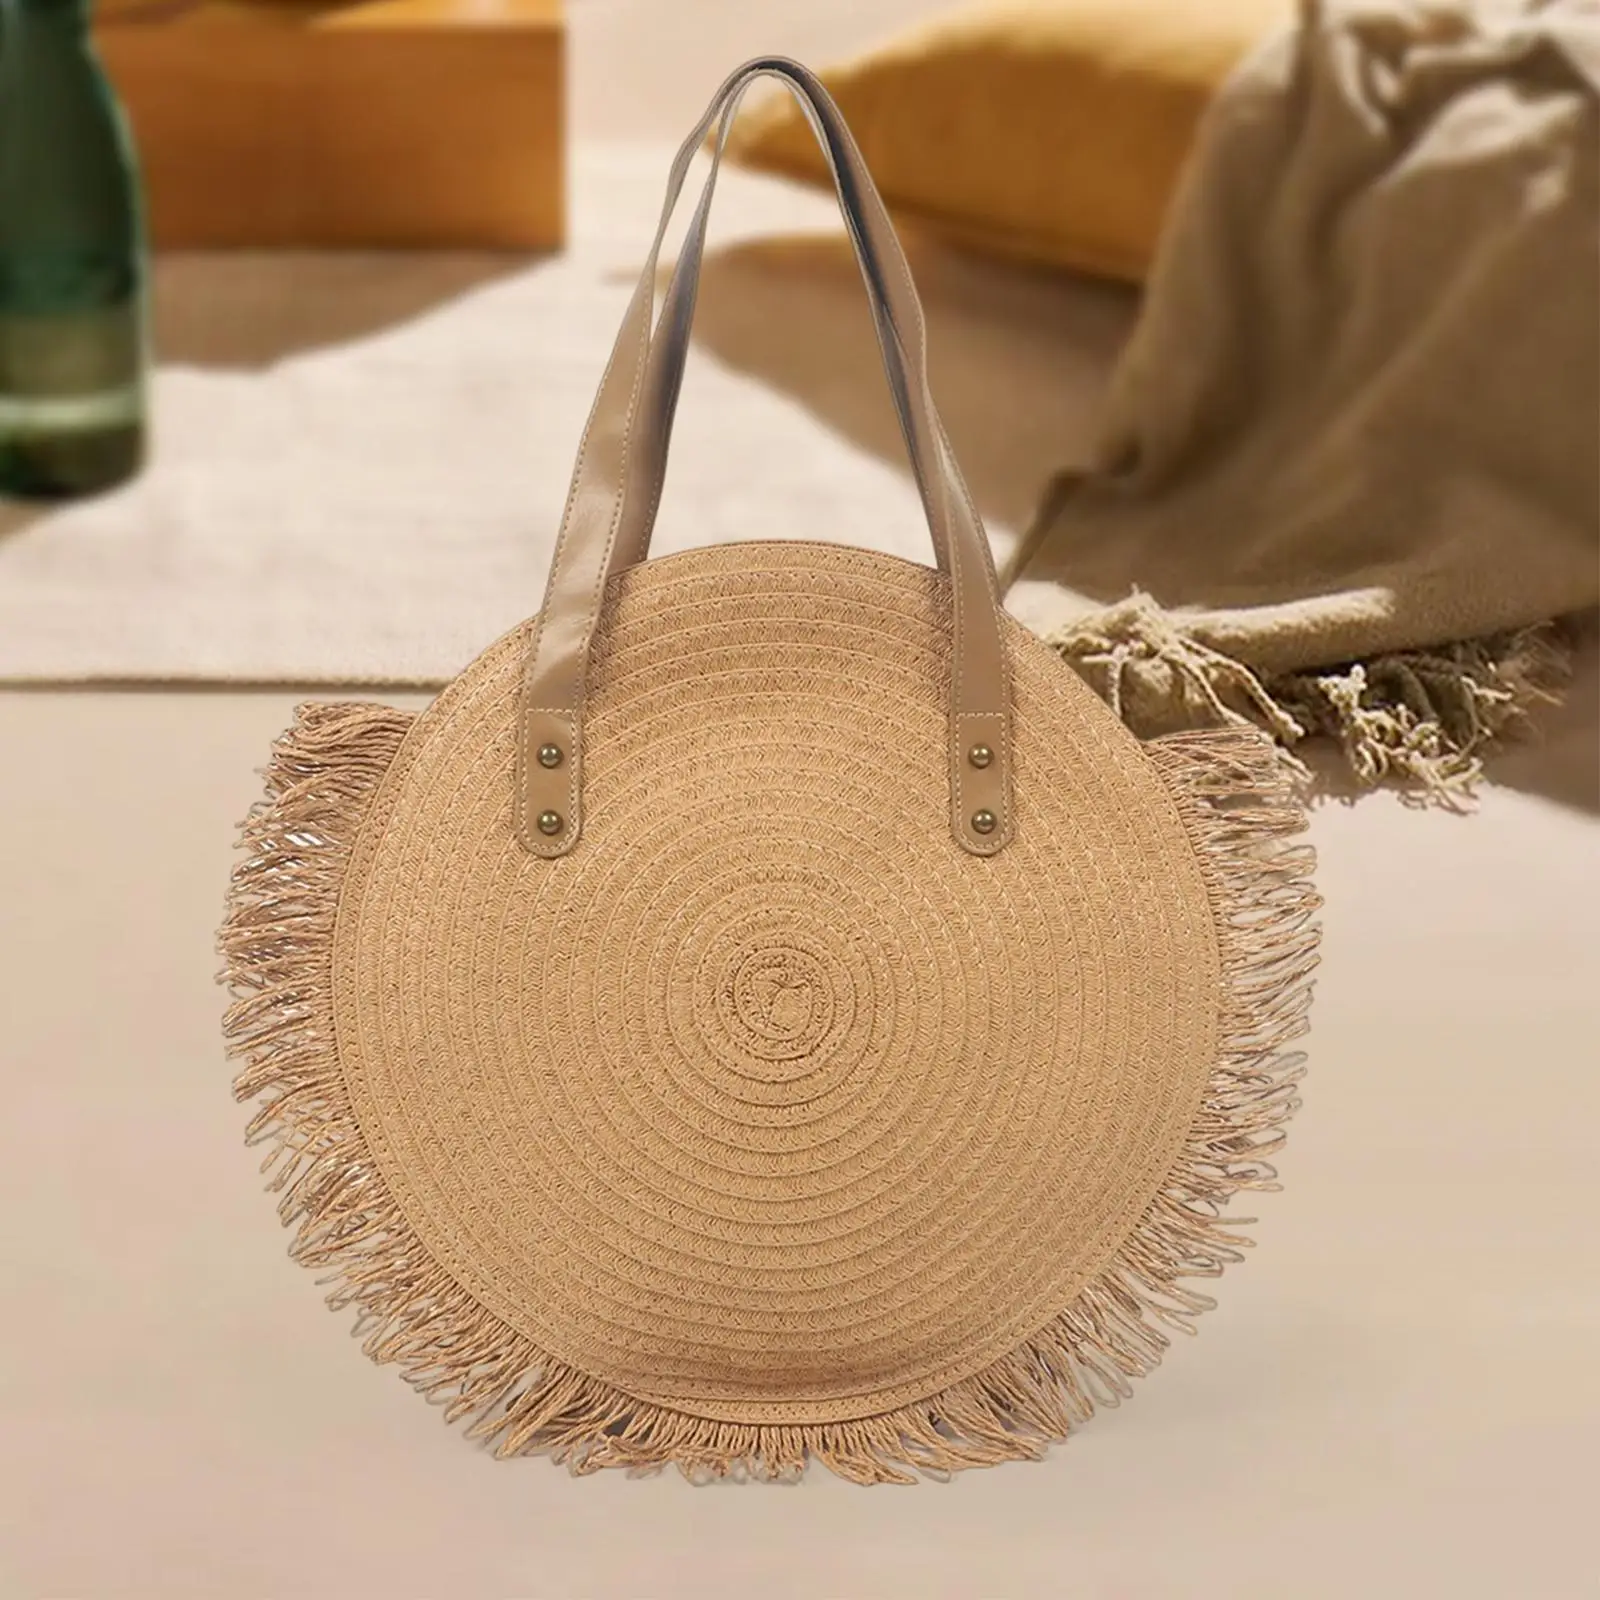 Round Straw Bag Handwoven Boho Tote Shoulder Bag for Vacation Summer Beach